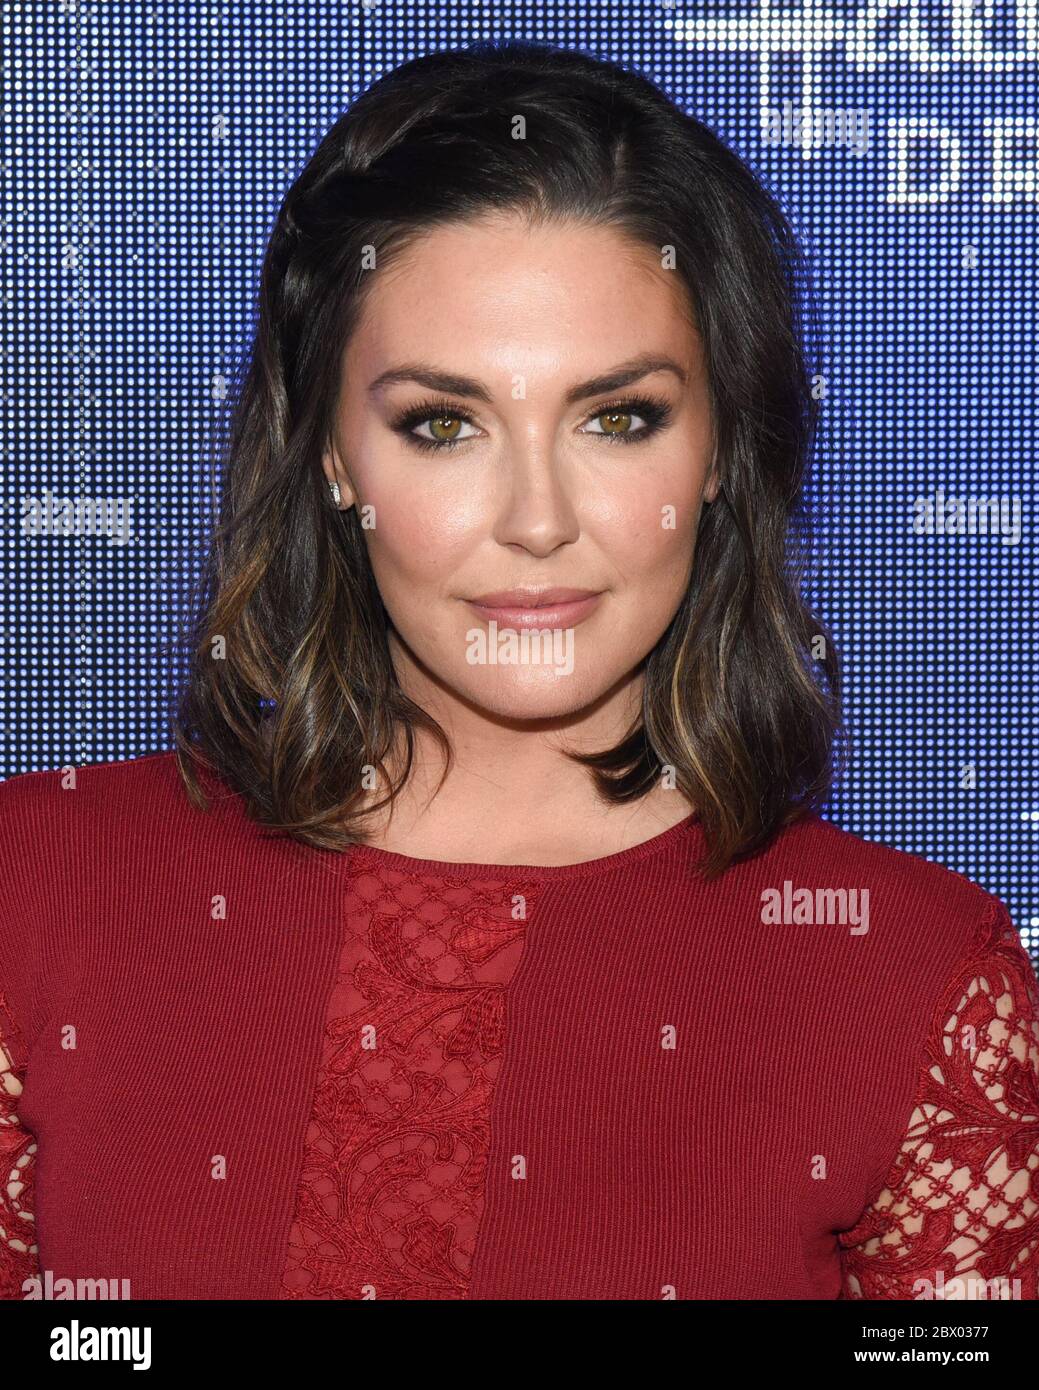 July 26, 2019, Bevrly Hills, California, USA: Taylor Cole attends the Hallmark Channel and Hallmark Movies & Mysteries Summer 2019 TCA at Private Residence, Beverly Hills, California on July 26, 2019. (Credit Image: © Billy Bennight/ZUMA Wire) Stock Photo